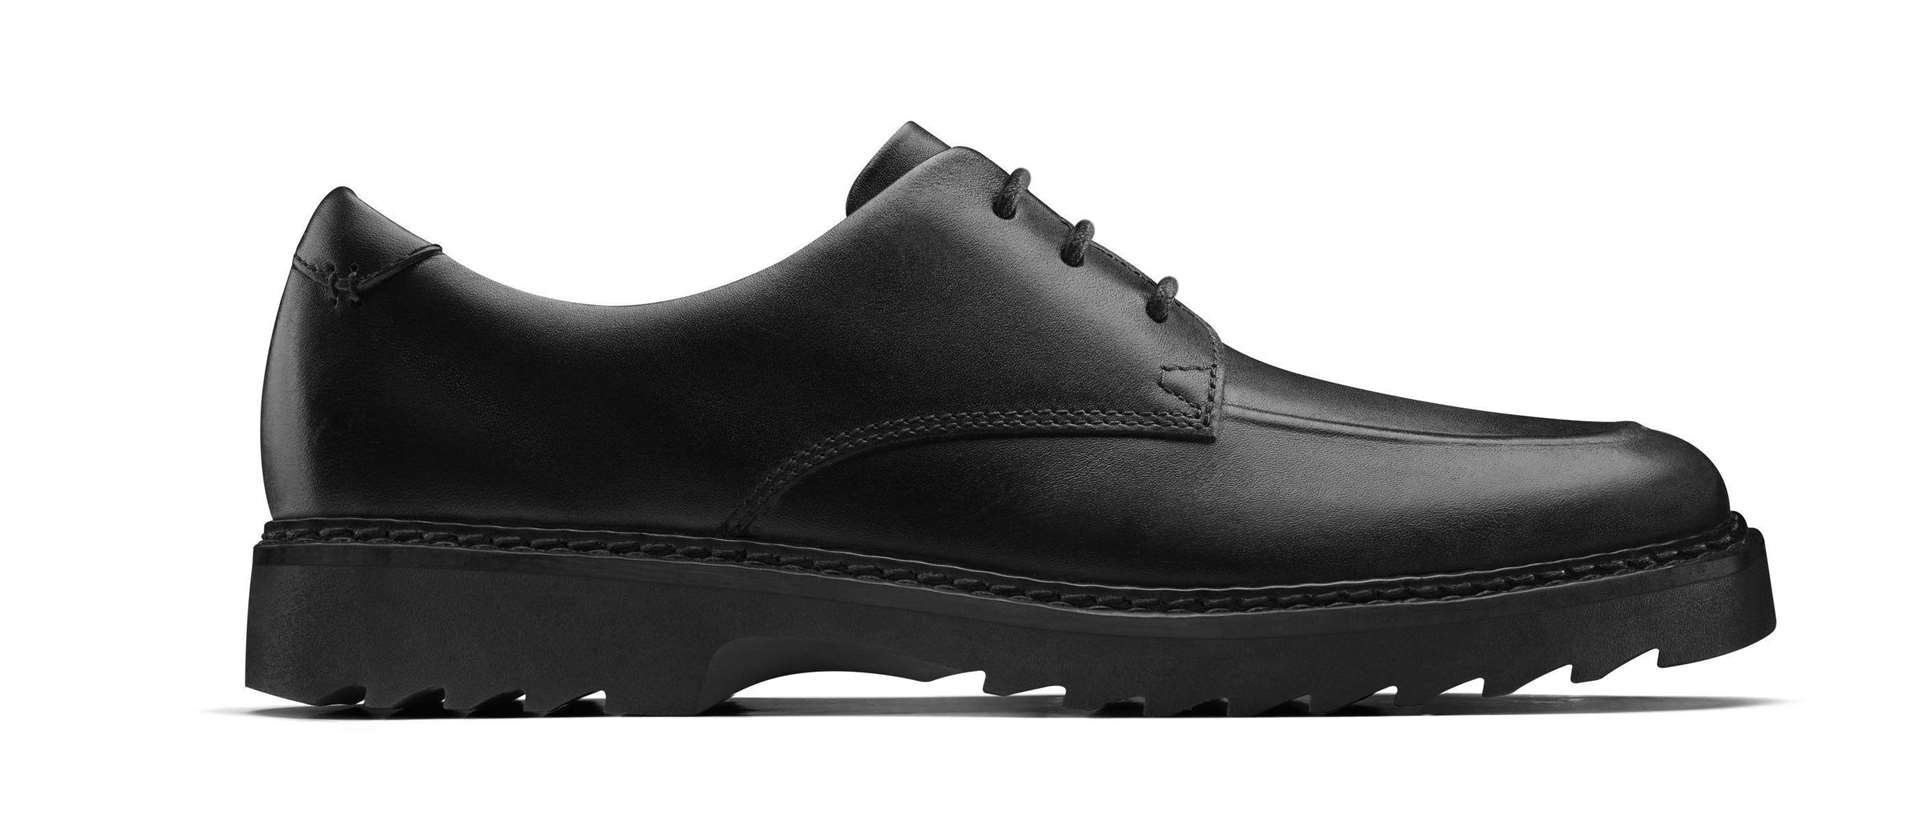 Asher Grove black leather school shoes, £60, Clarks